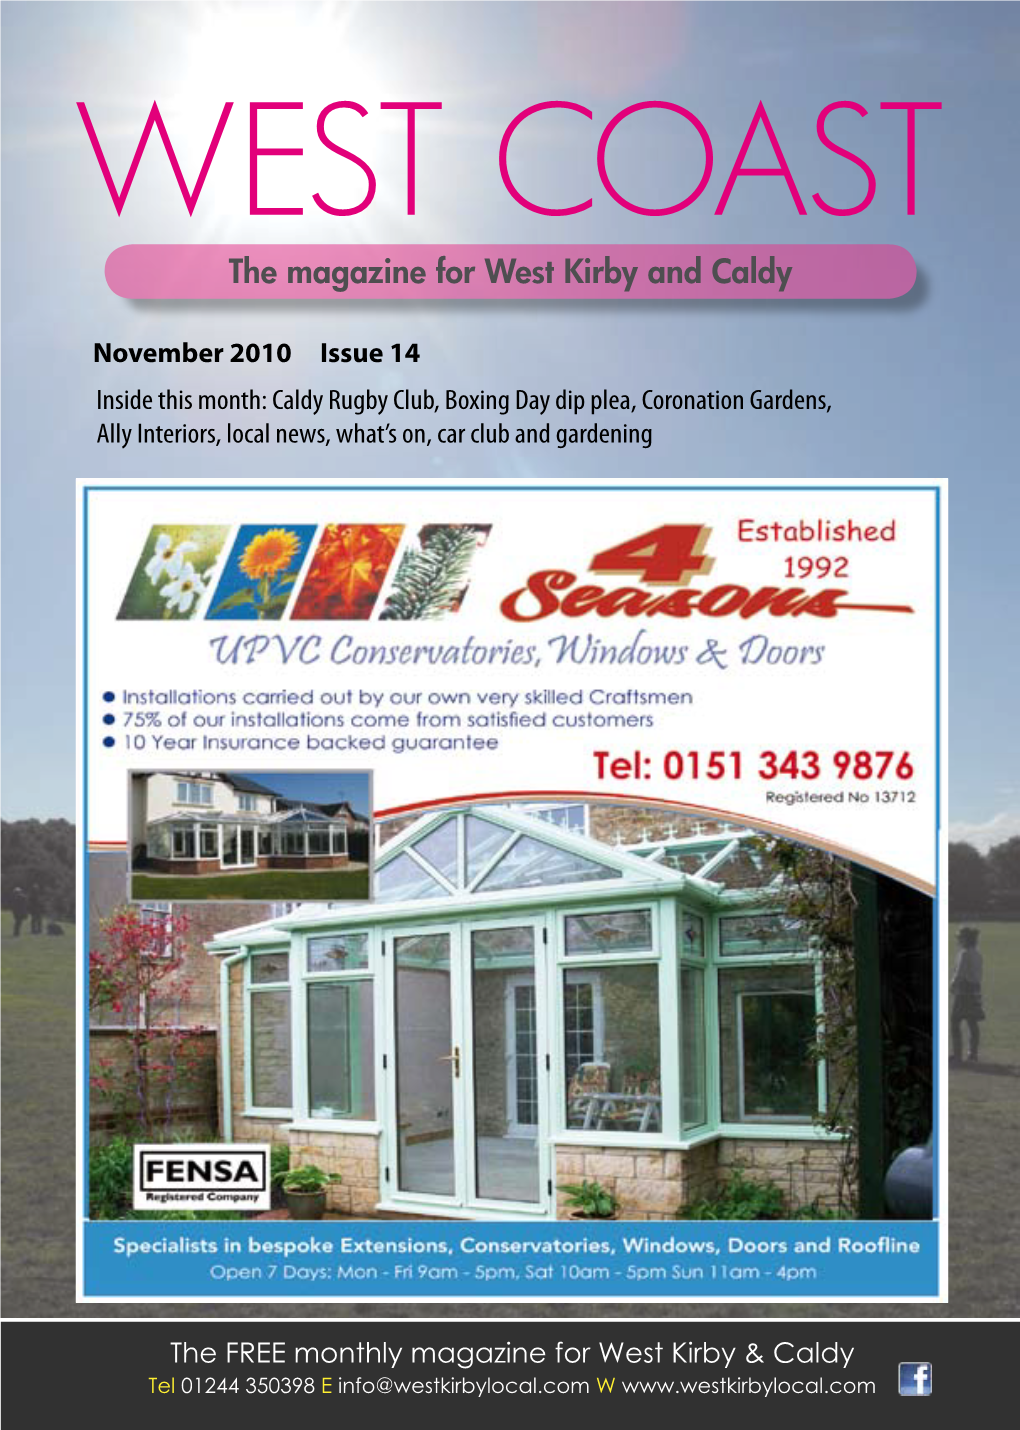 West Coast the Magazine for West Kirby and Caldy